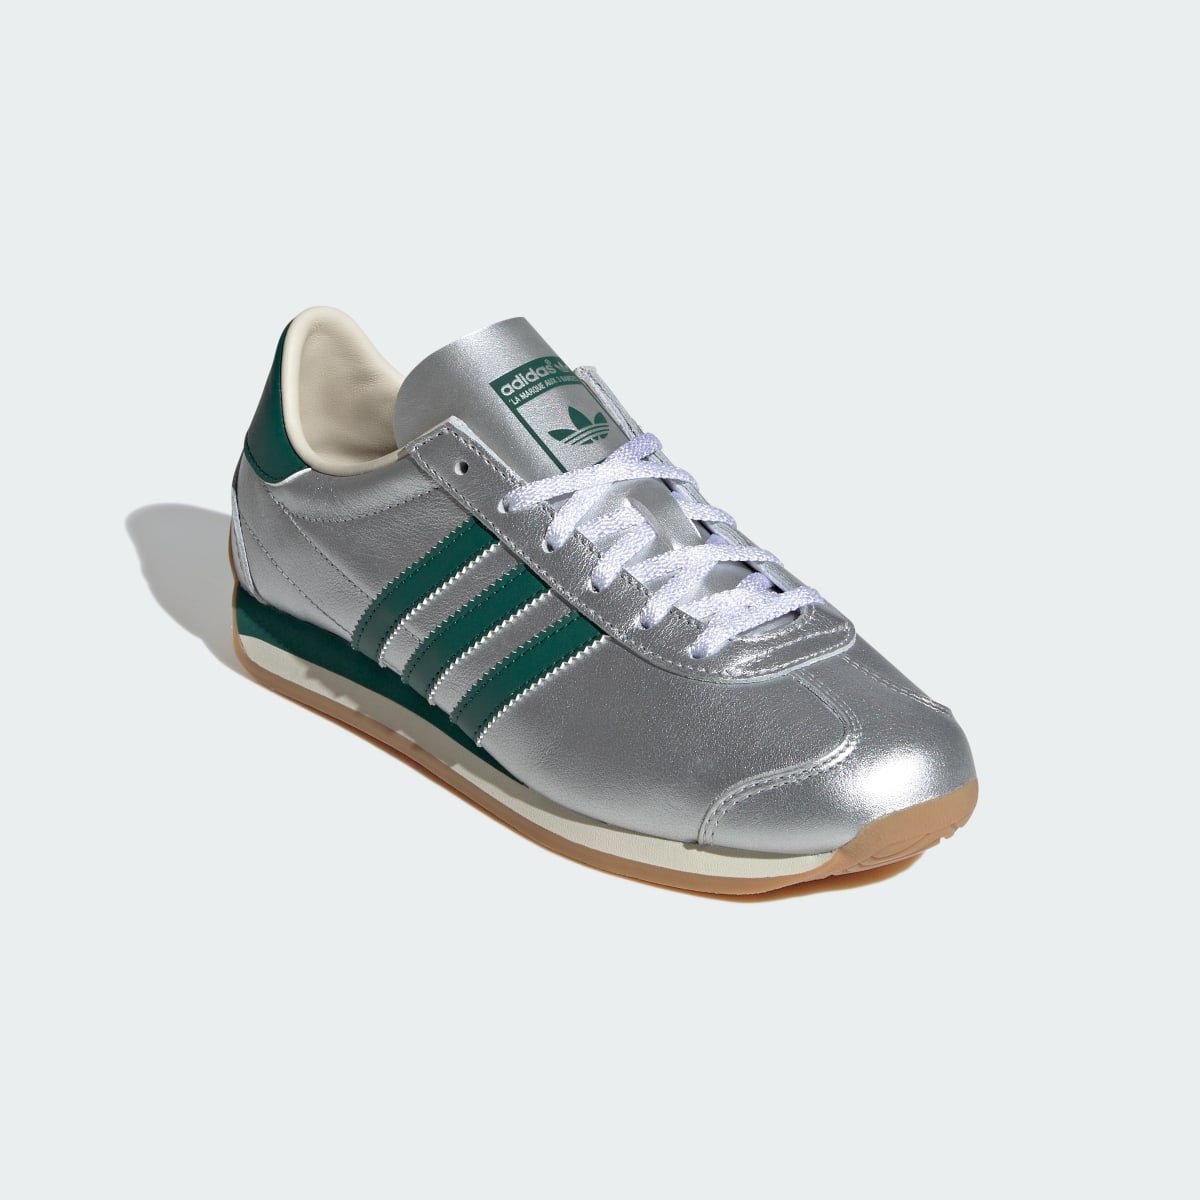 Adidas Country OG Shoes. 5